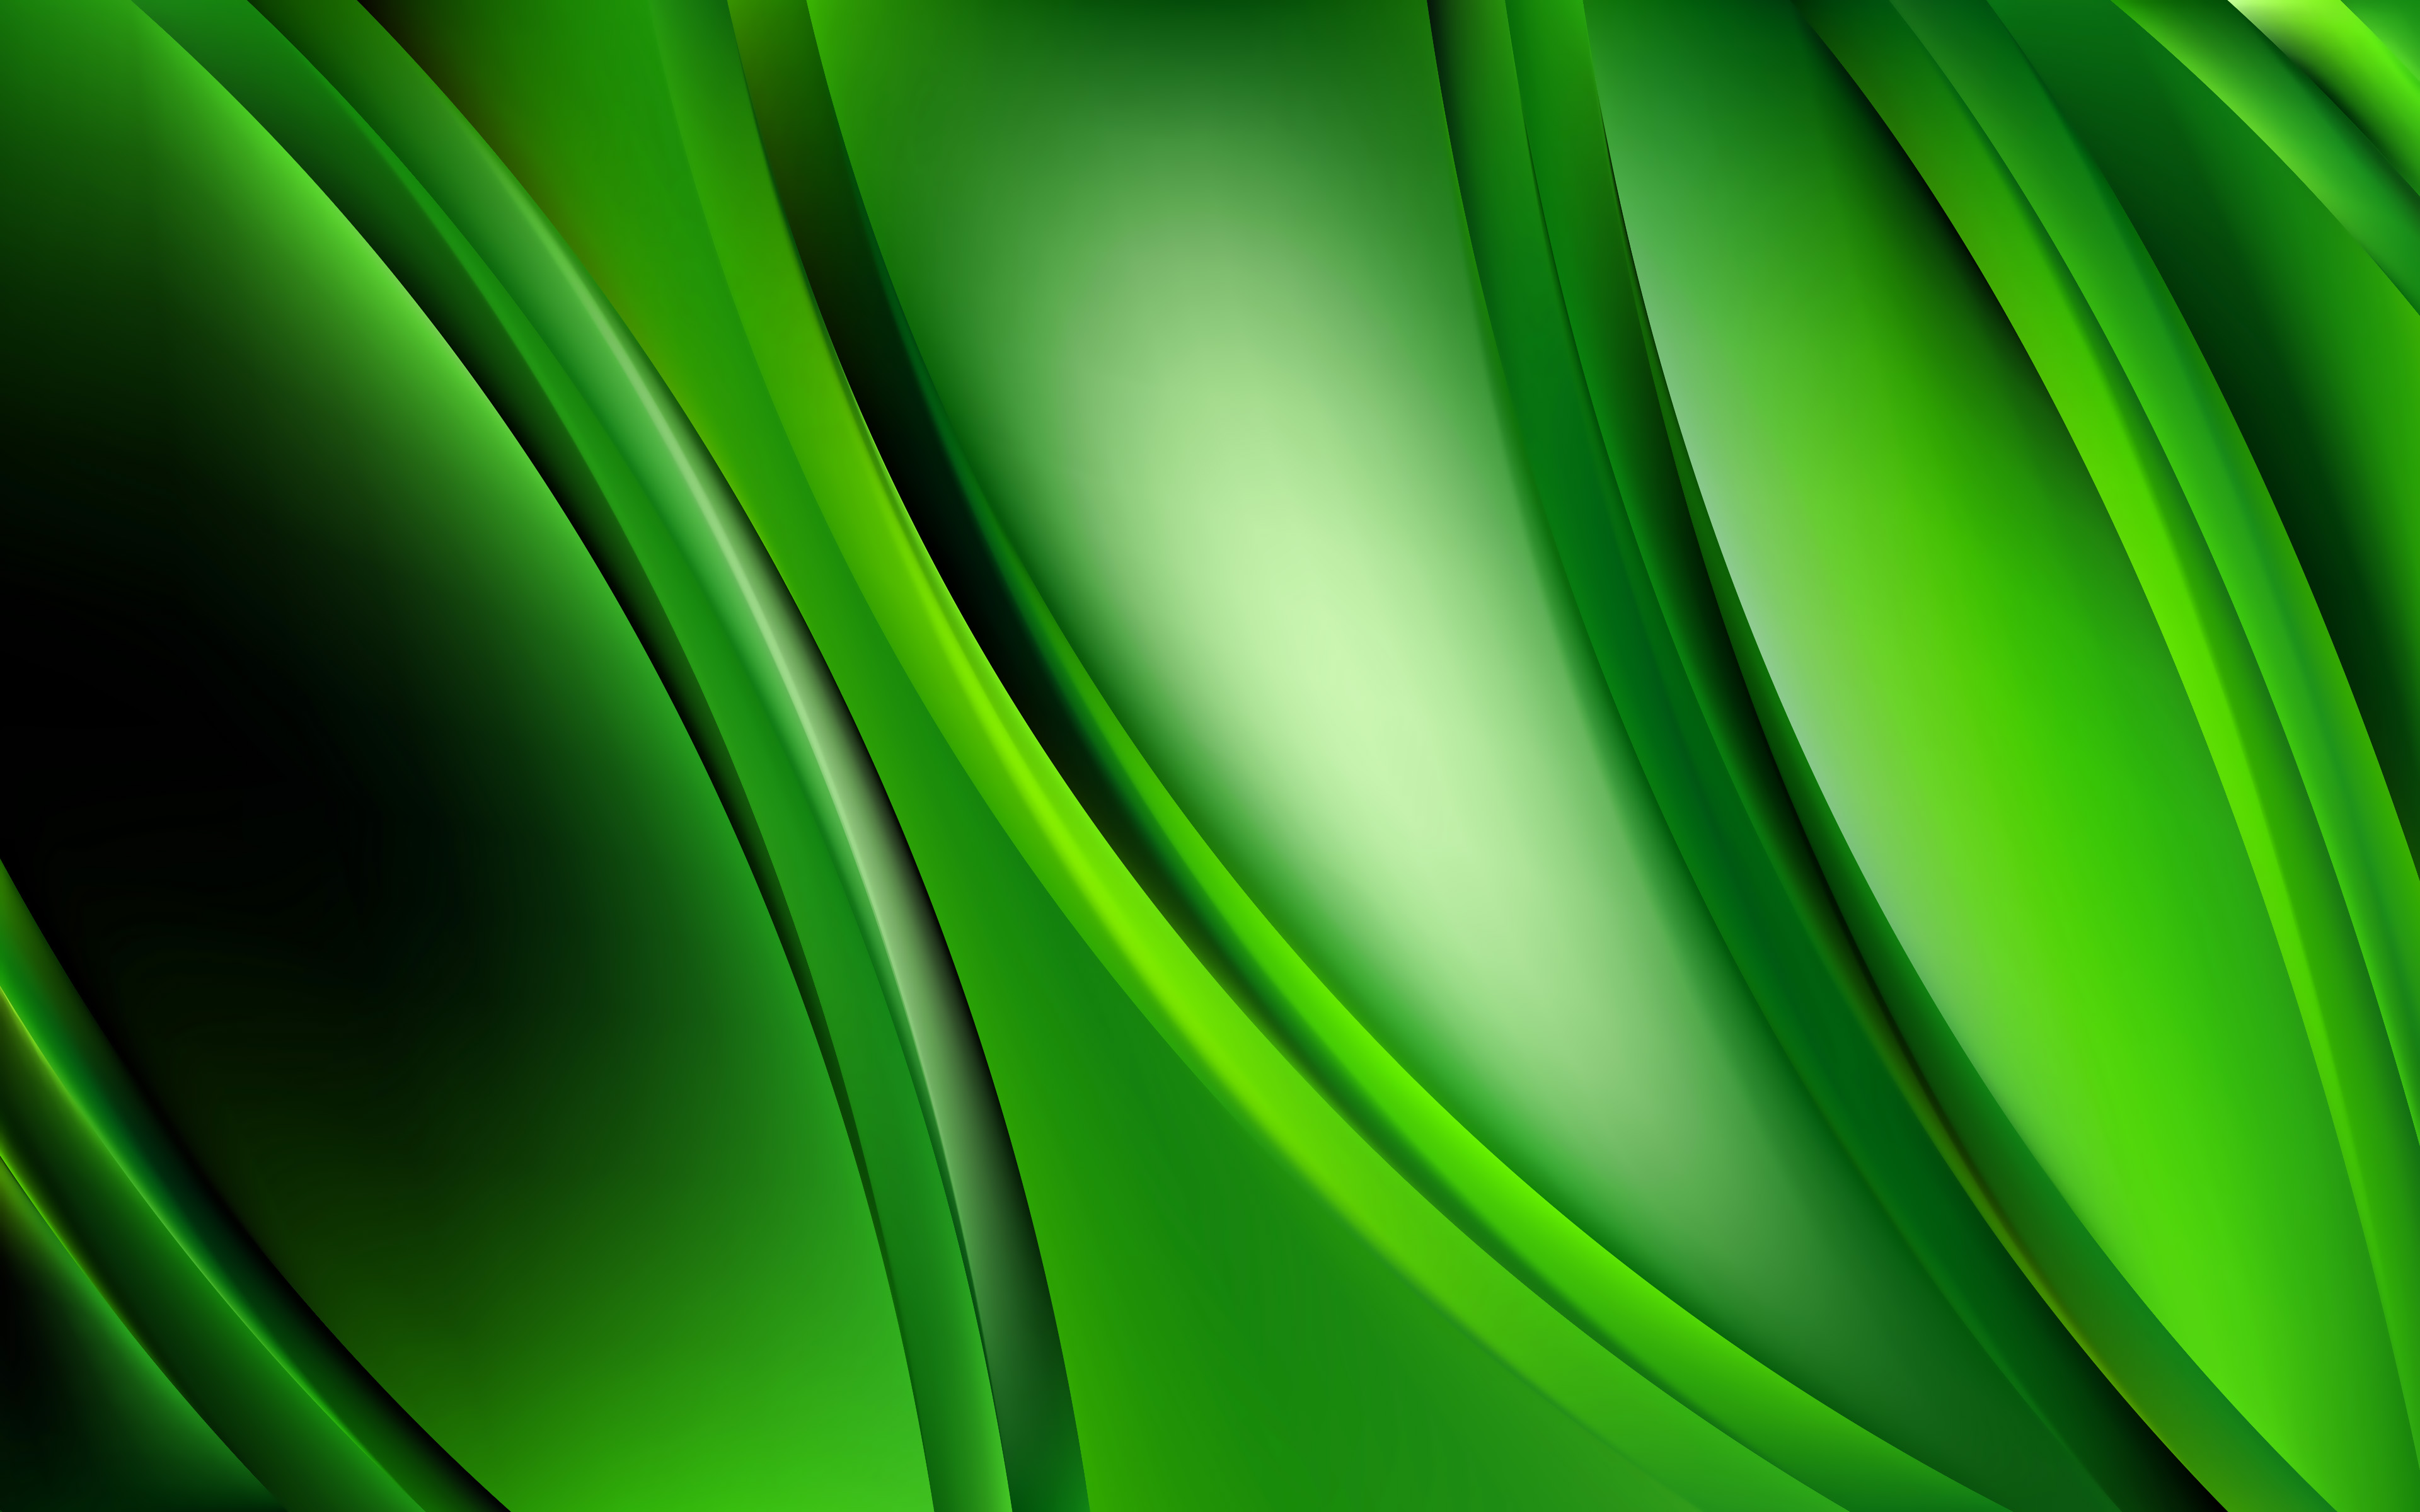 Abstract Wave In Green For Windows 11 Background Hd Wallpapers Images